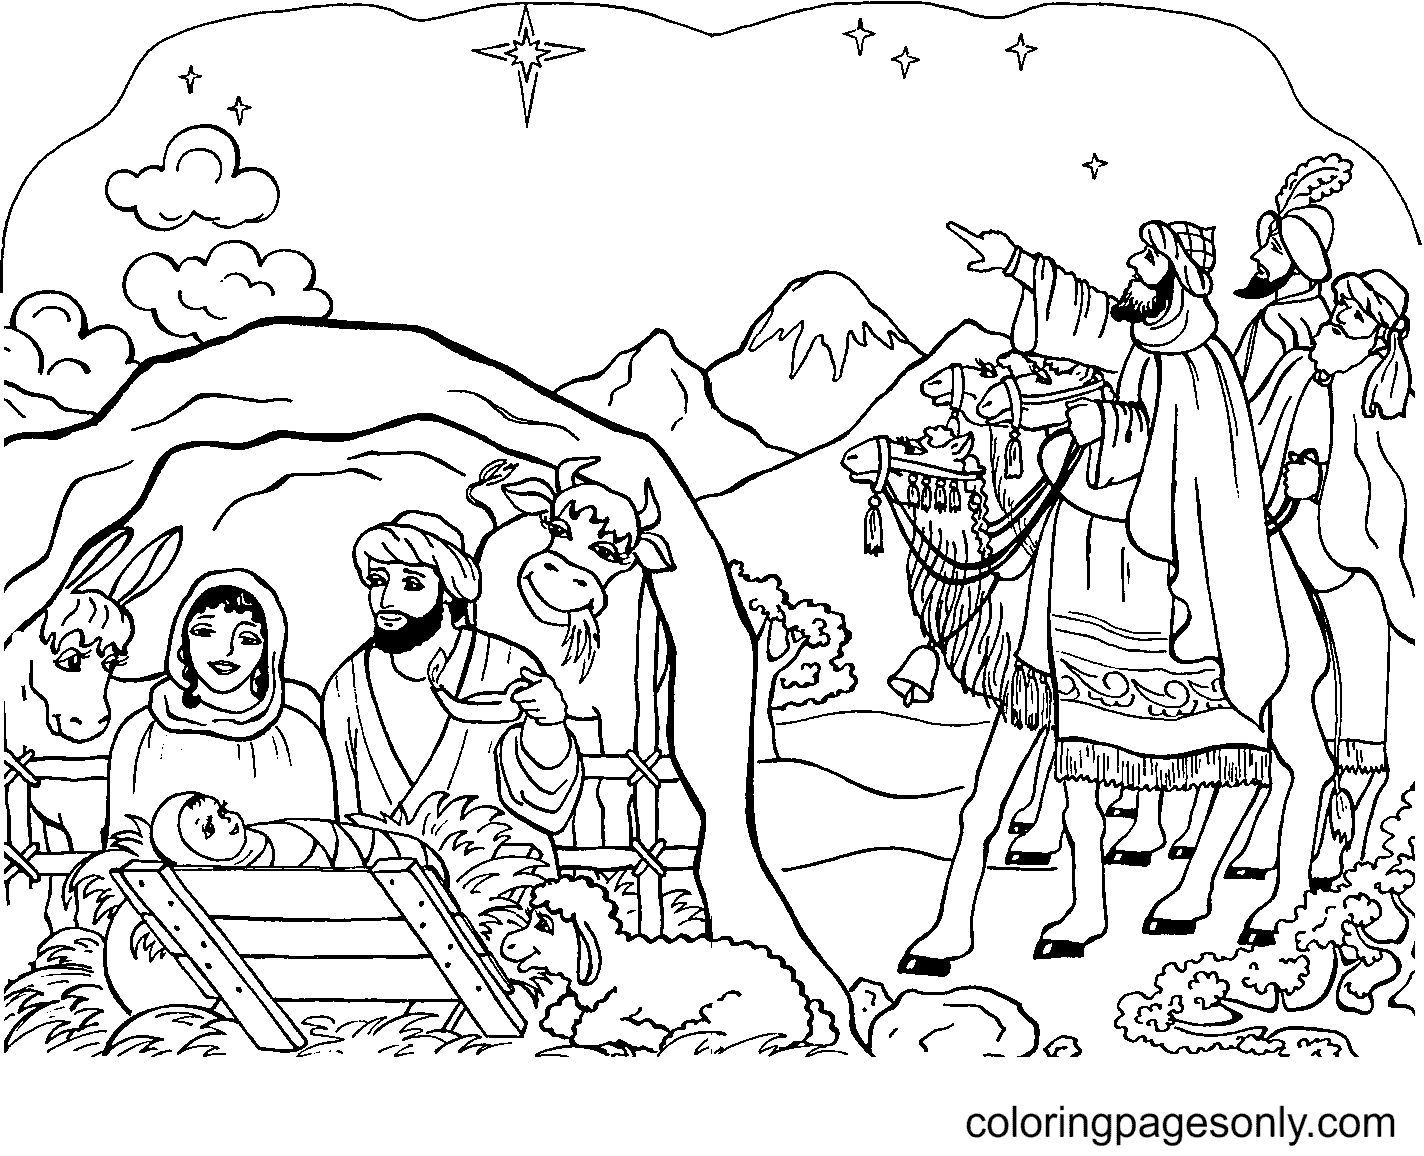 Printable Religious Christmas Coloring Pages